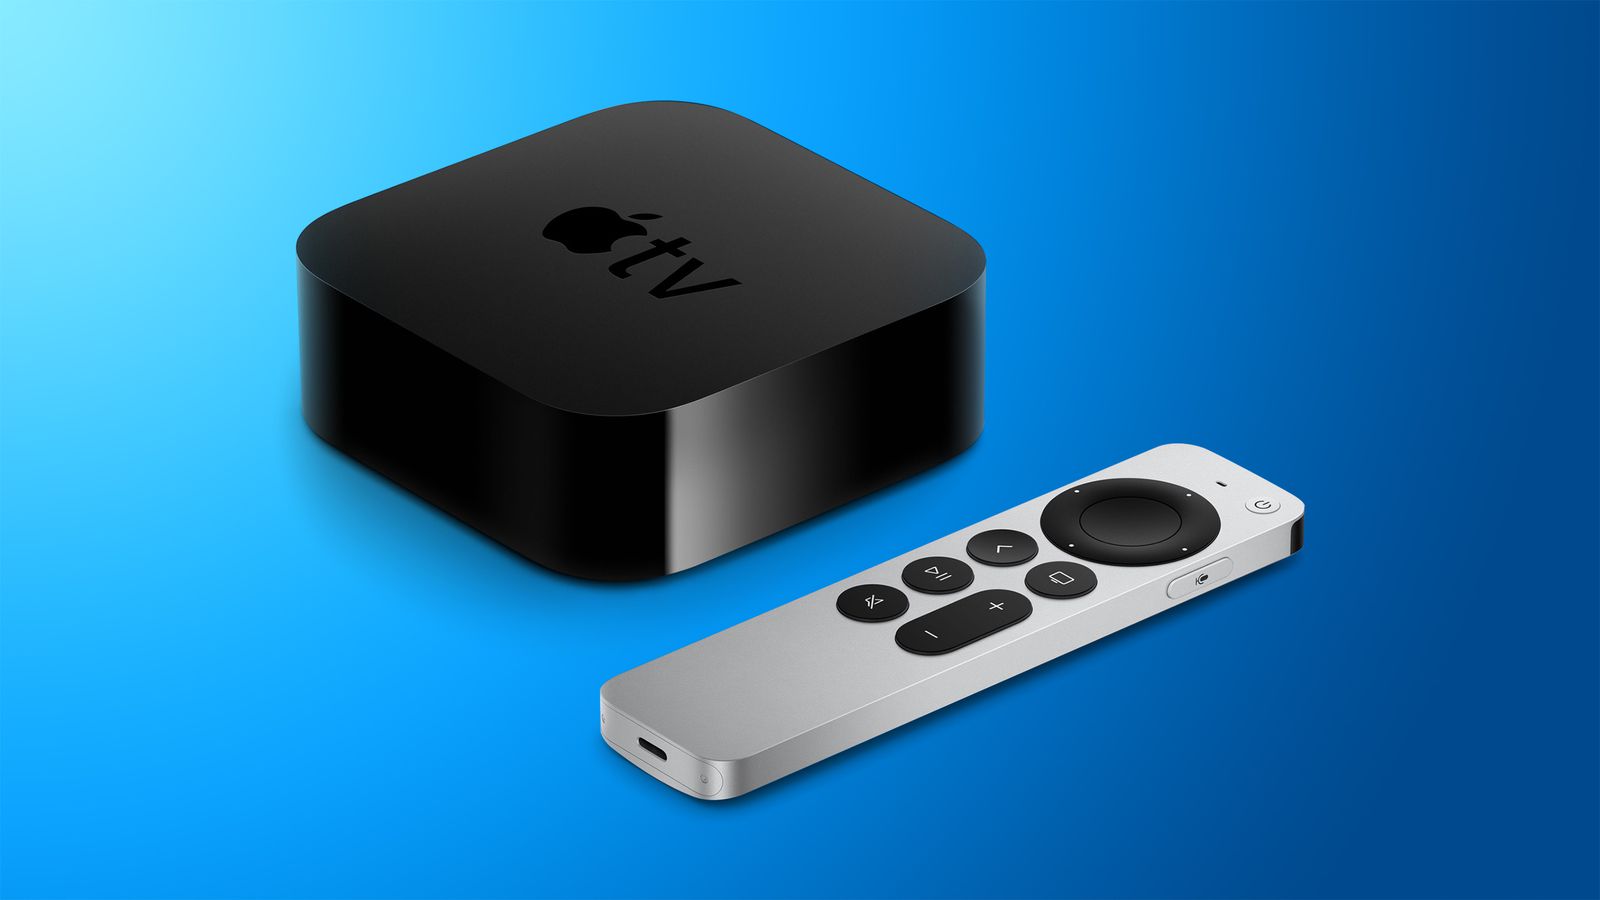 tvOS 17.2 RC available with new Apple TV app and more